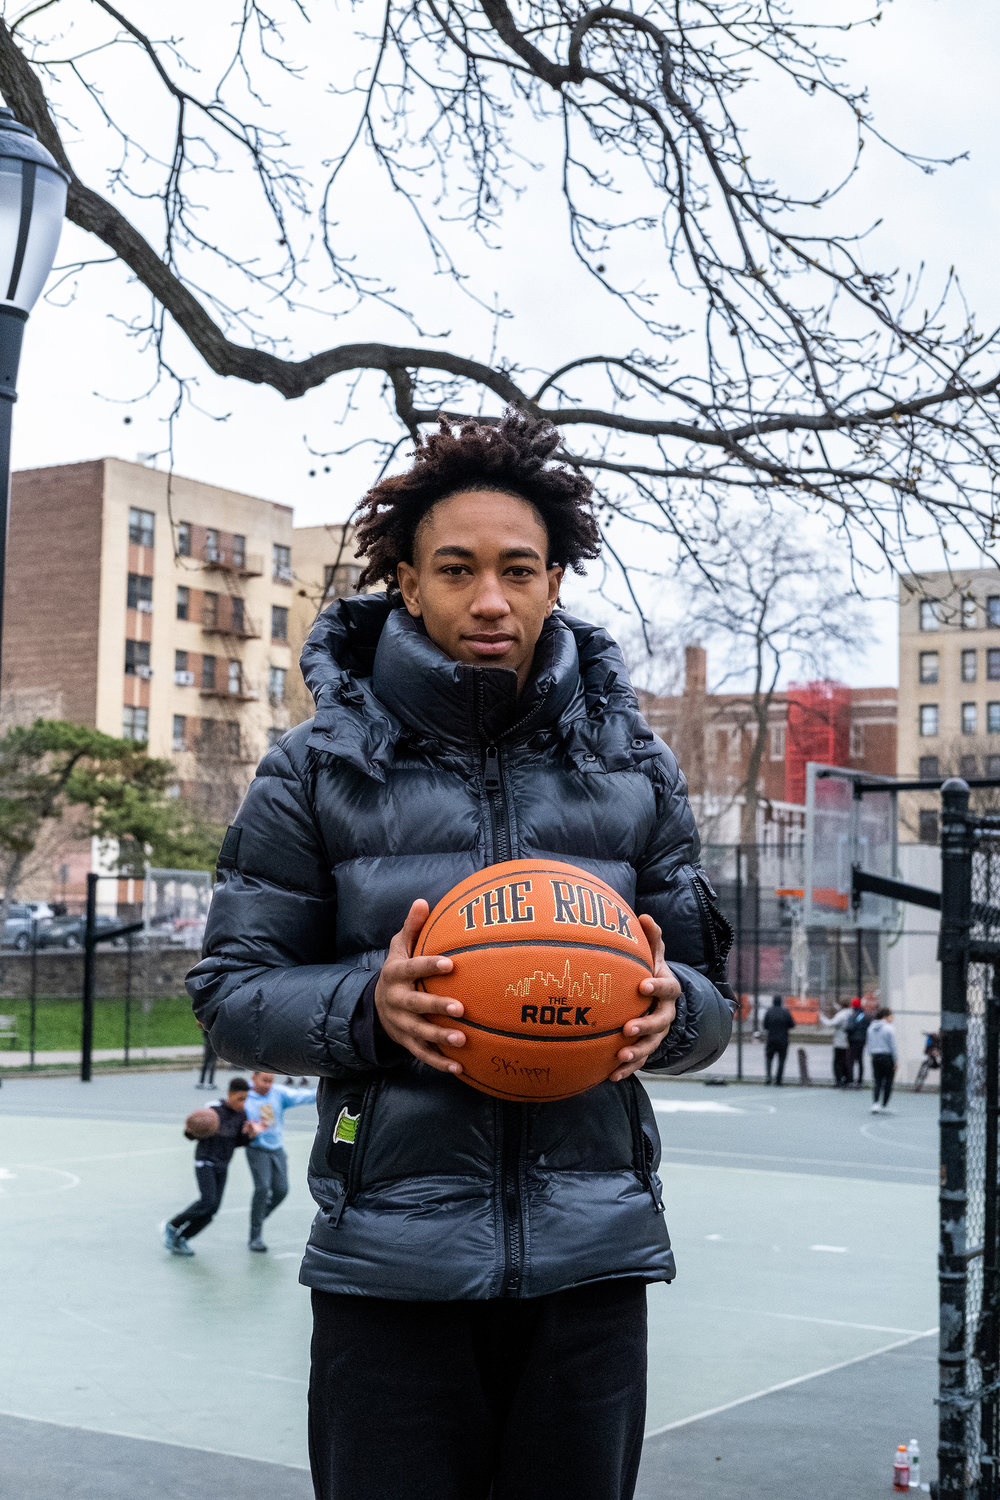 Jomauri Peña holds the “rock” at a basketball court recently as he tell his story about how he wound up playing for DeWitt Clinton High School boys basketball team and earning All-State honors.